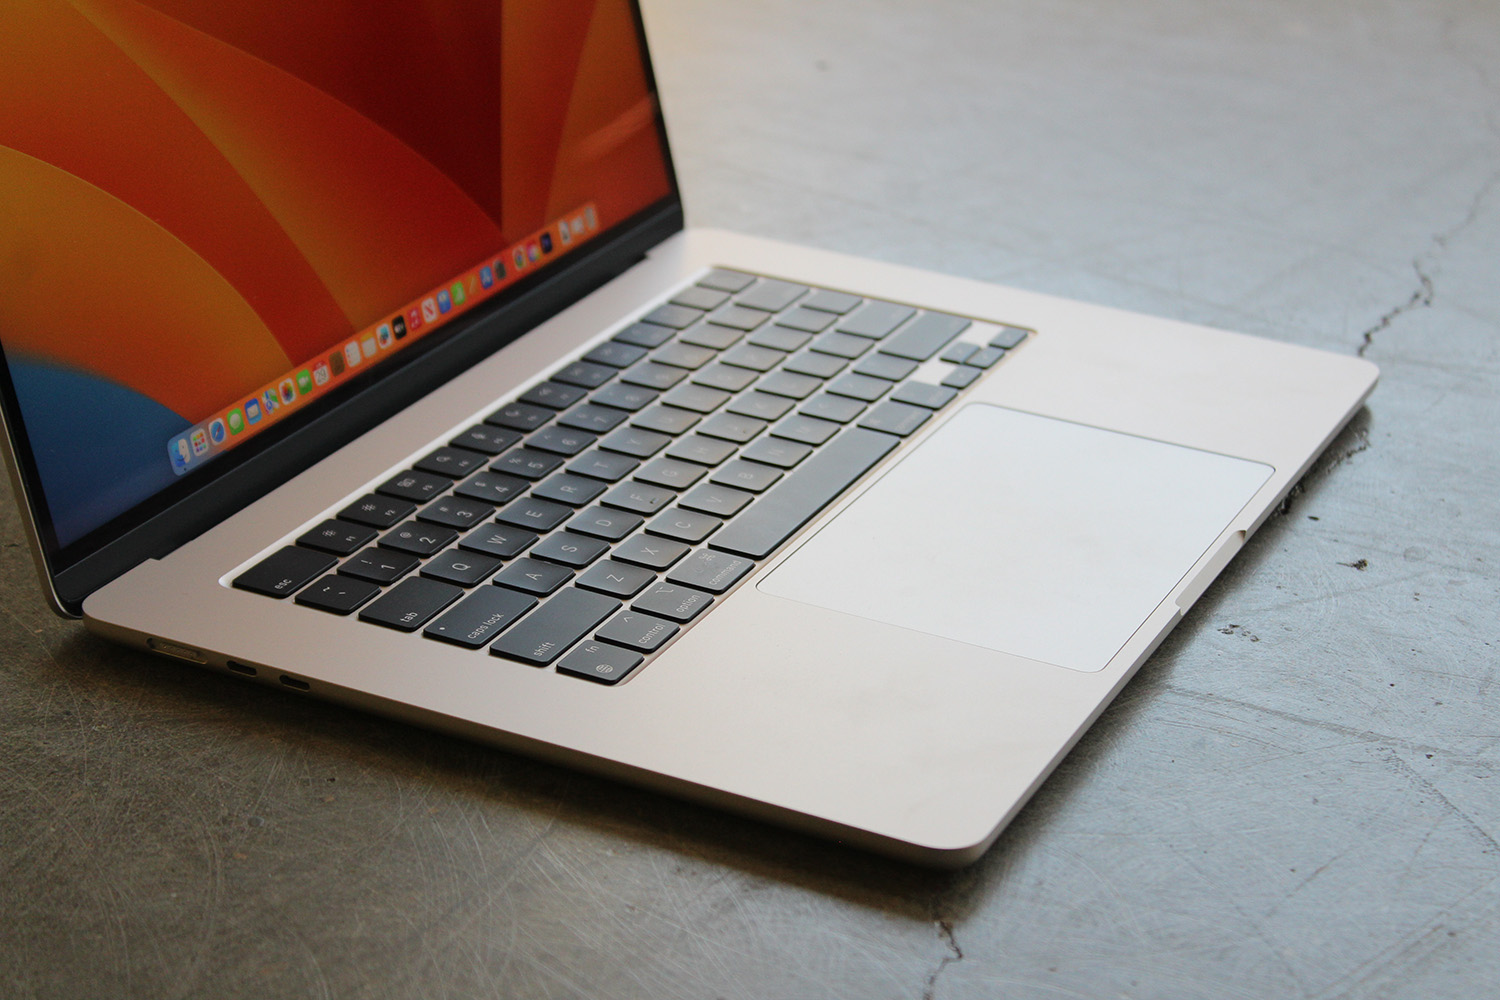 Apple MacBook Air 15-inch review: An obvious addition